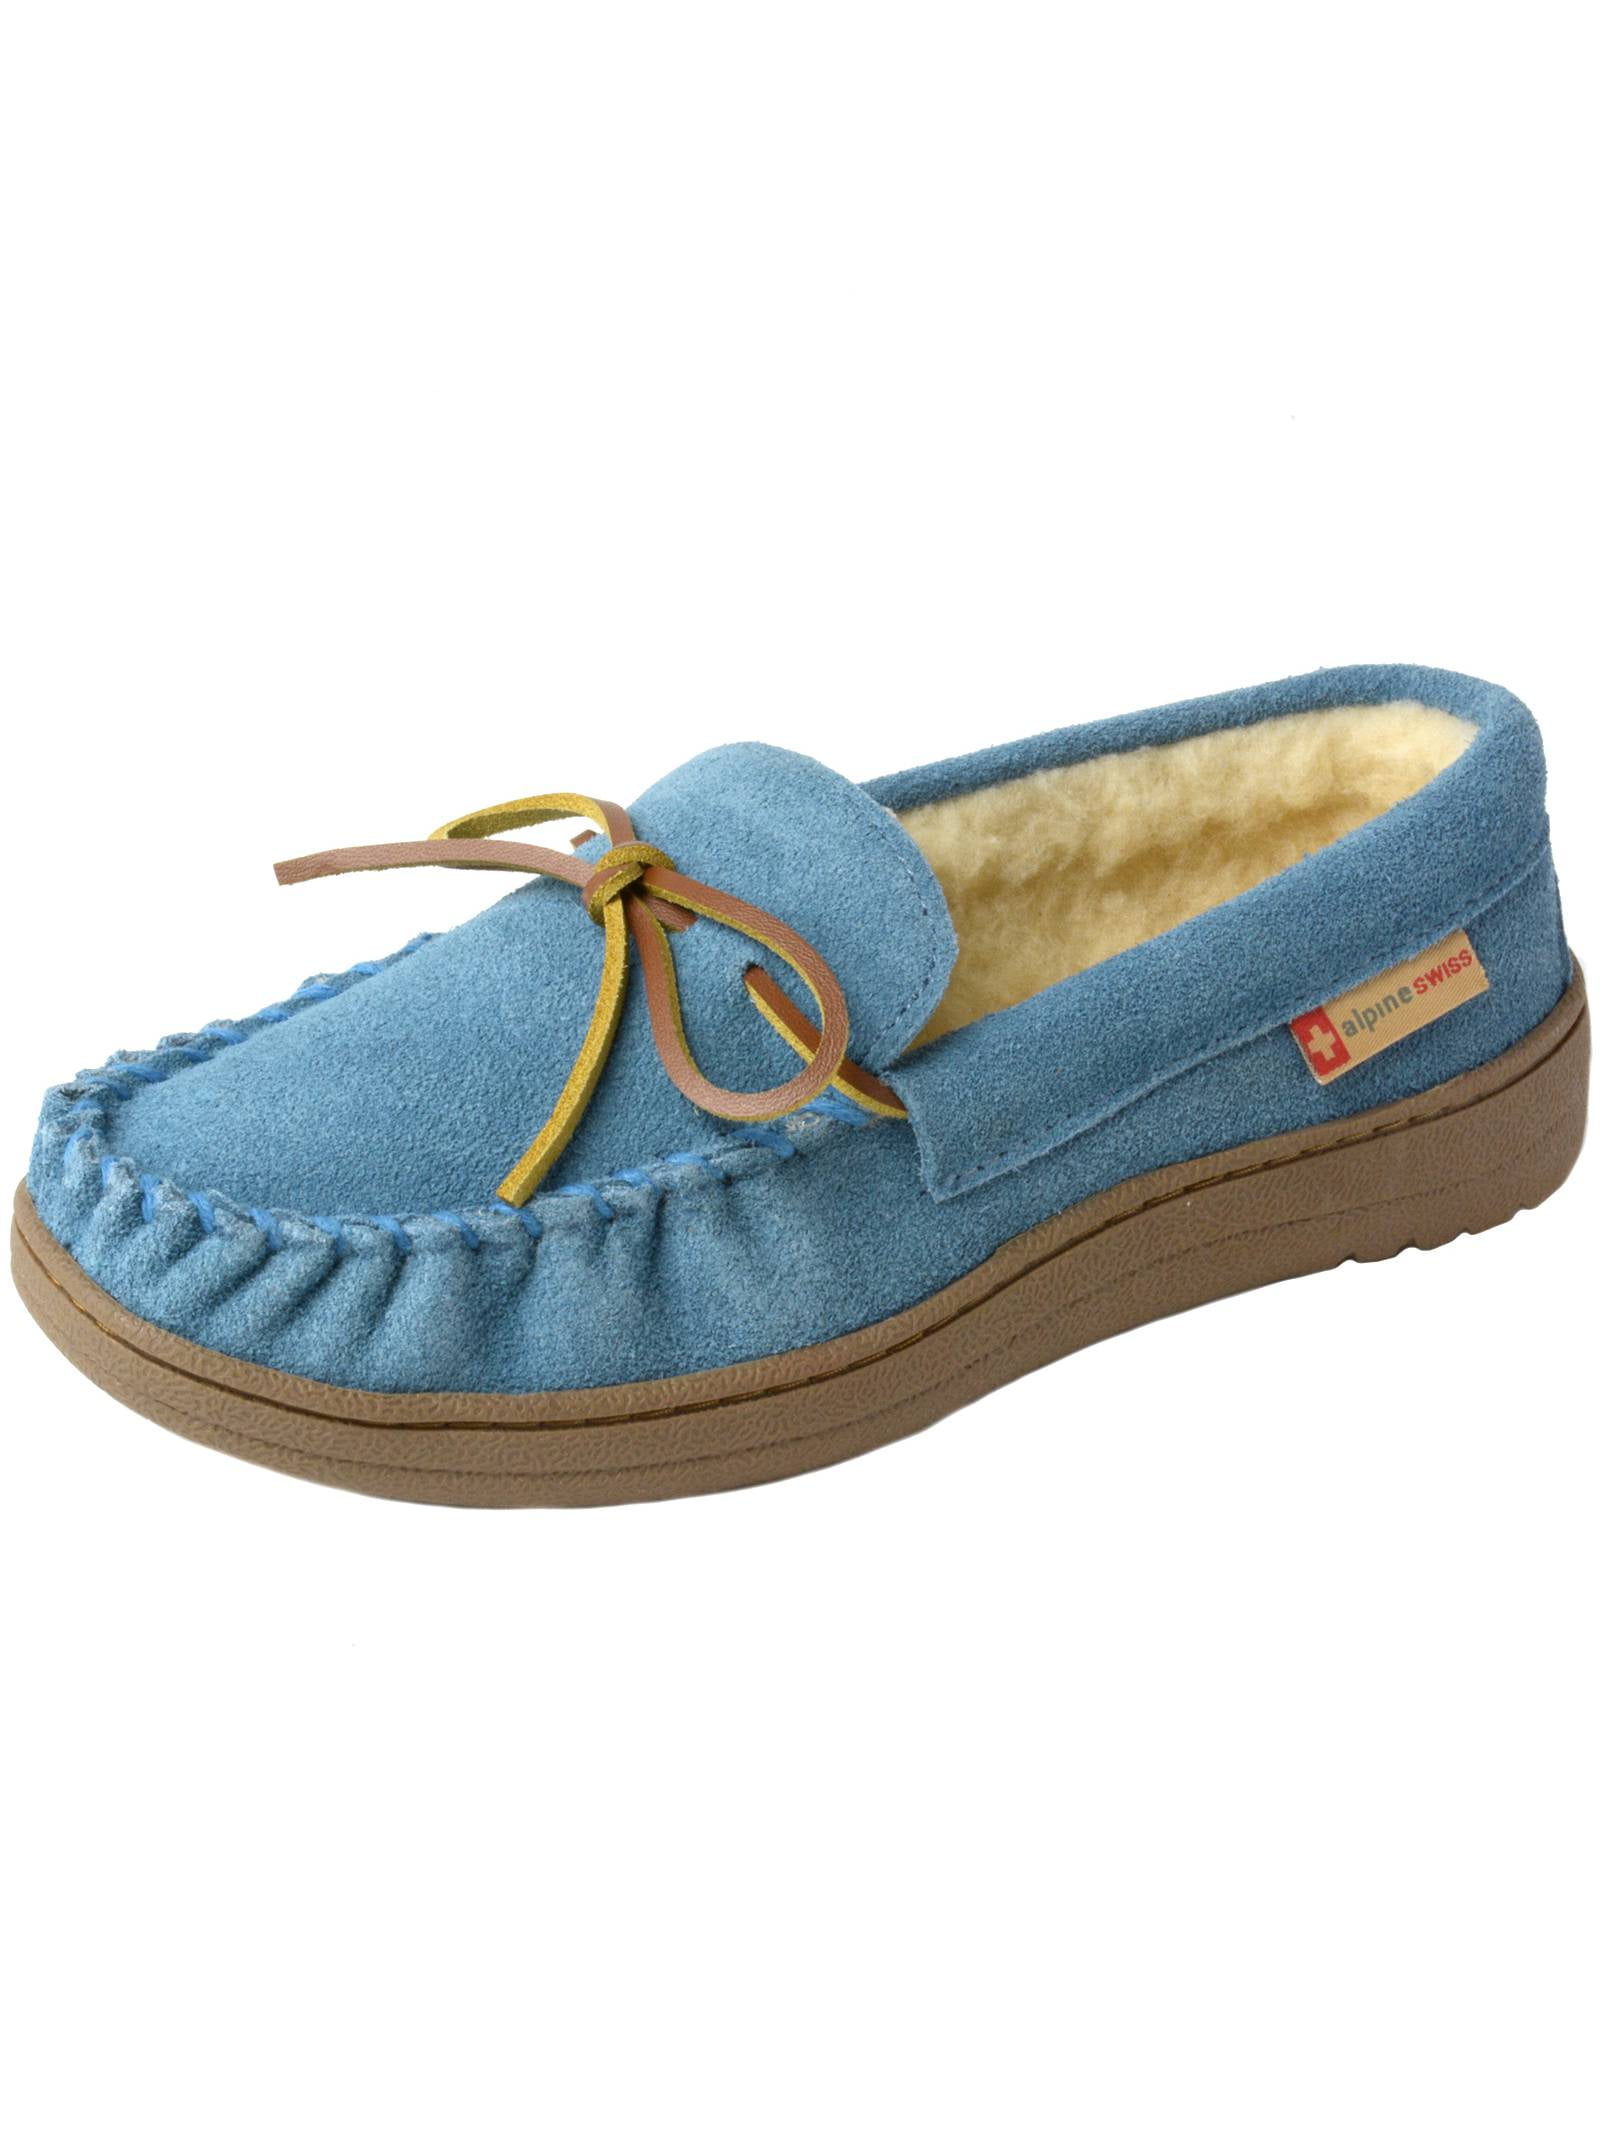 Alpine Swiss - Alpine Swiss Sabine Womens Suede Shearling Moccasin Slippers House Shoes Slip On